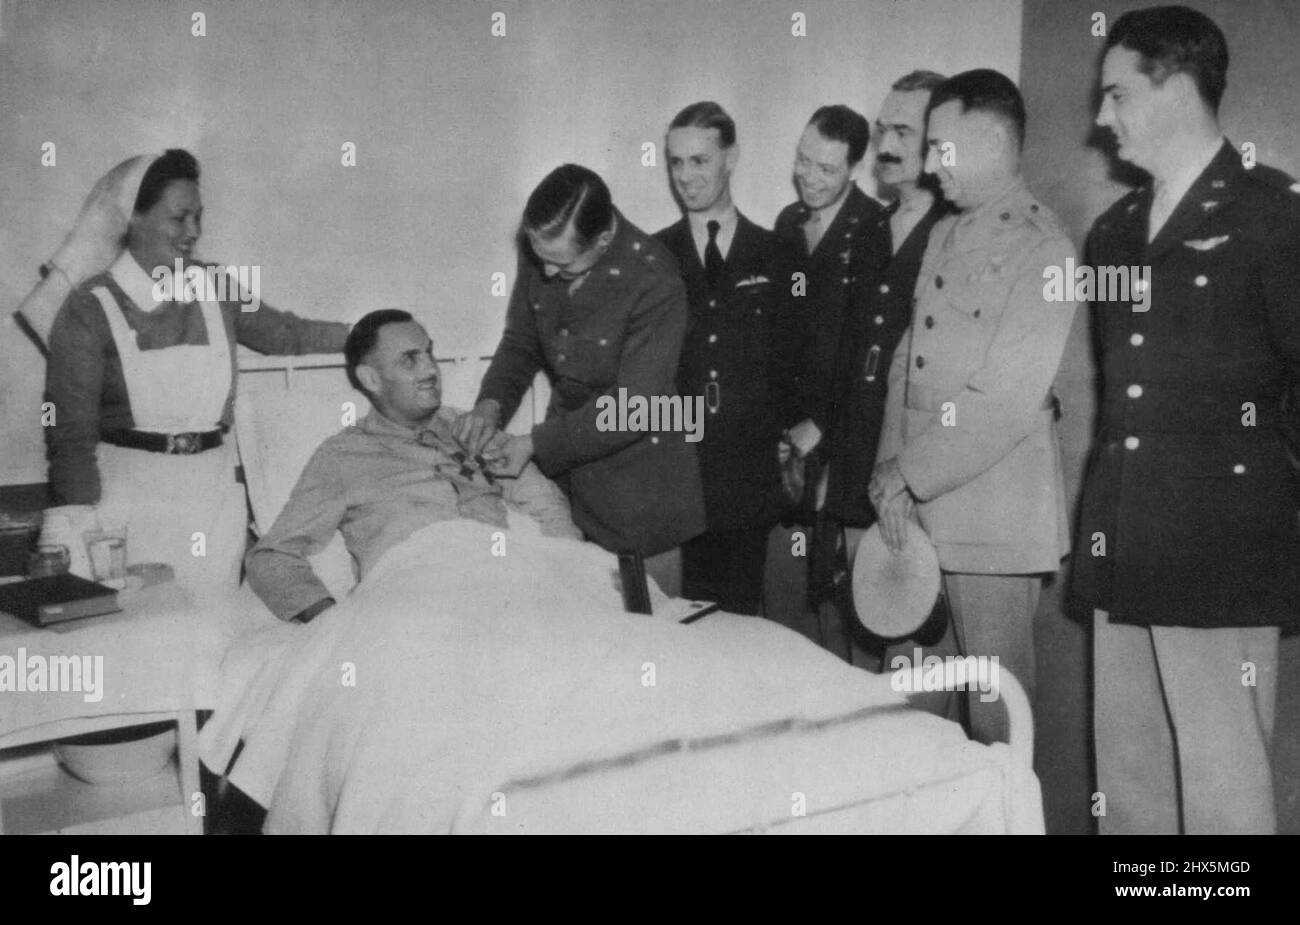 Lying on hospital bed at a Canadian Army base some where in the United Kingdom, Lieut. Col. Loren B. Hillsinger of New York receives distinguished service cross and order of the purple heart from Brig. Gen. L.K.Truscott Jr. for his valor in the dieppe raid, where he lost a leg. Other officers right to left are Lt. Col. D. E. Williams, Col. H. D. Campbell, Brig, F. O'D. Hunter, Brig. Gen. H.A. Craid, and group captain A. H. Willetts of the RAF. nurse is Andree Dalton, of Prince Edward island, Canada. September 20, 1942. (Photo by AP Wirephoto). Stock Photo